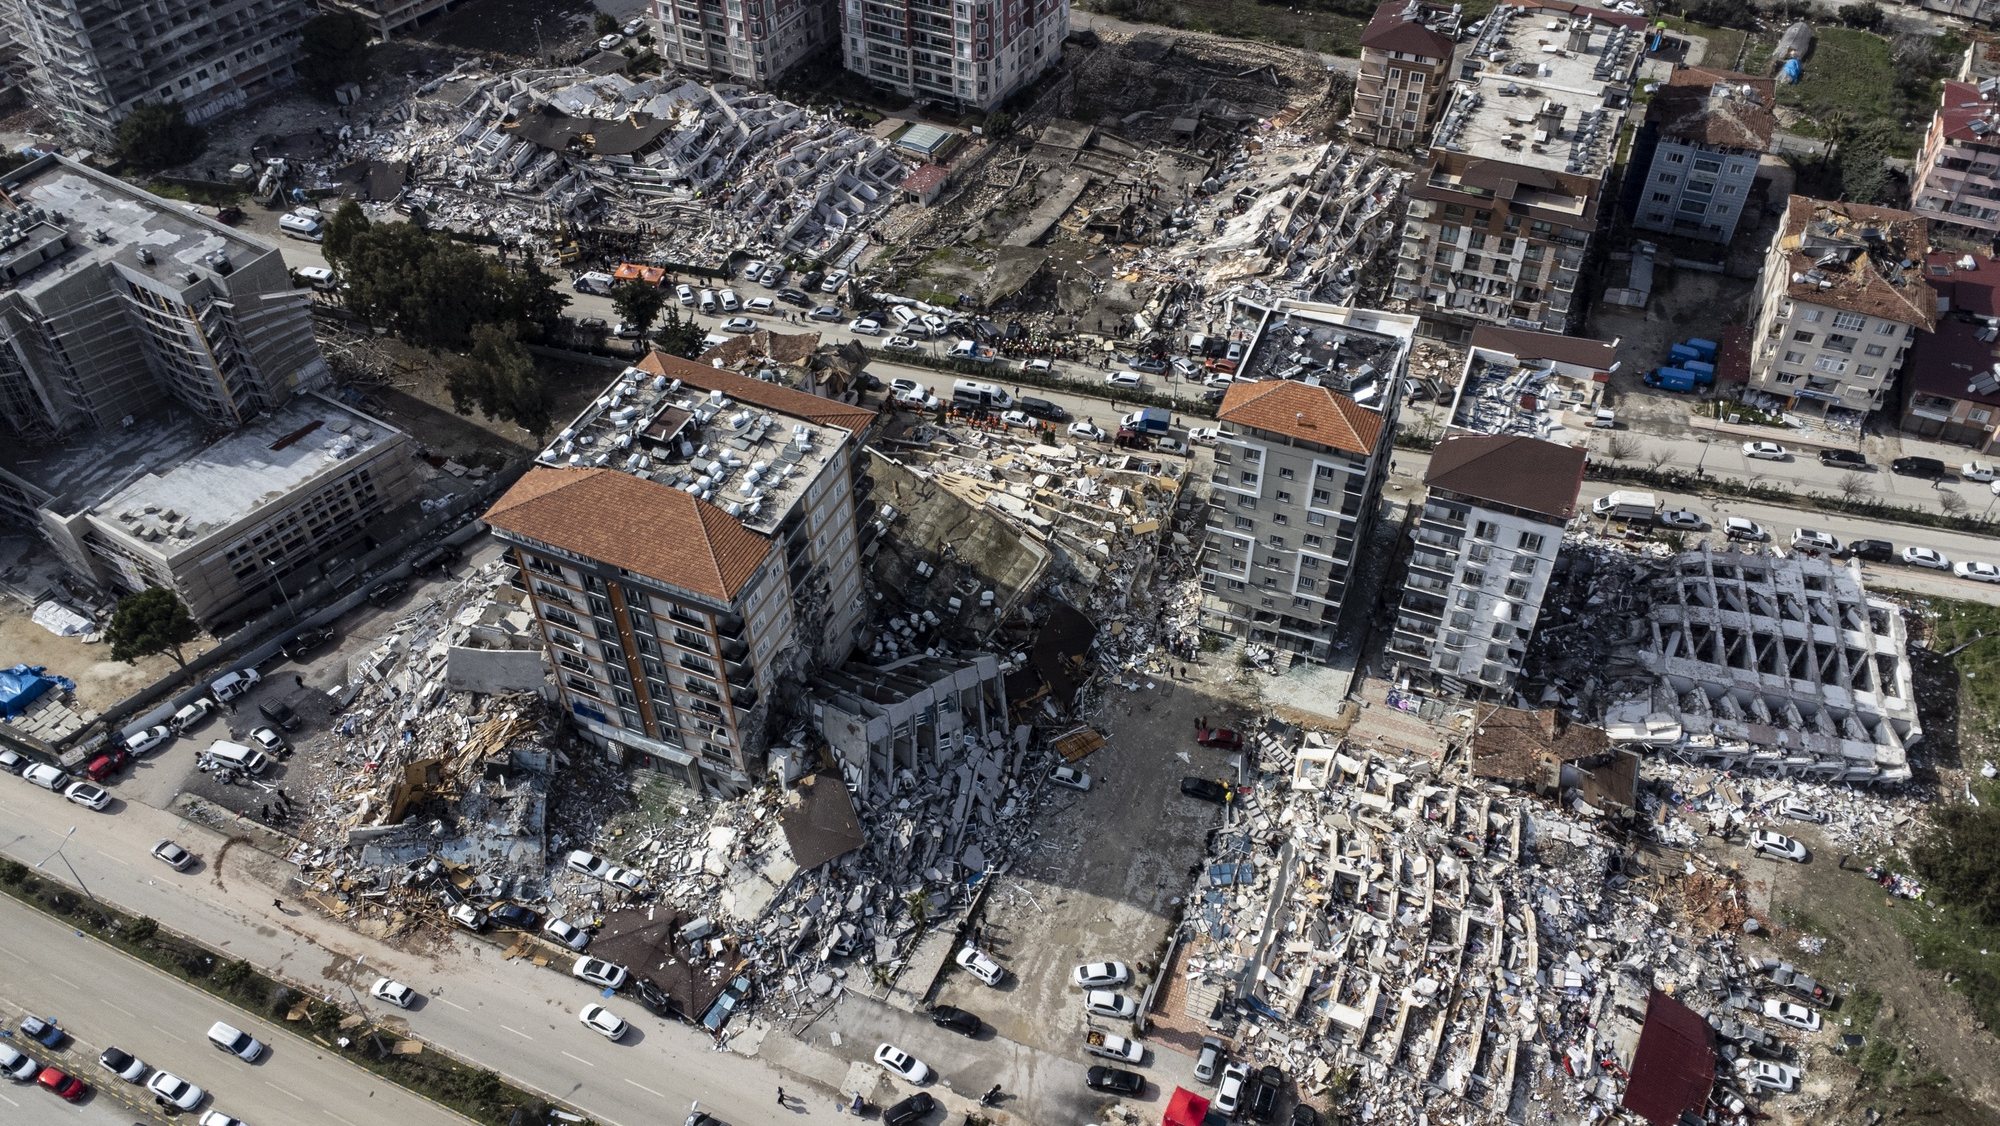 epa10452945 A photo taken with a drone shows a an aerial view over collapsed buildings after an earthquake in Hatay, Turkey, 07 February 2023. Thousands of people died and thousands more were injured after major earthquakes struck southern Turkey and northern Syria on 06 February. Authorities fear the death toll will keep climbing as rescuers look for survivors across the region.  EPA/ERDEM SAHIN